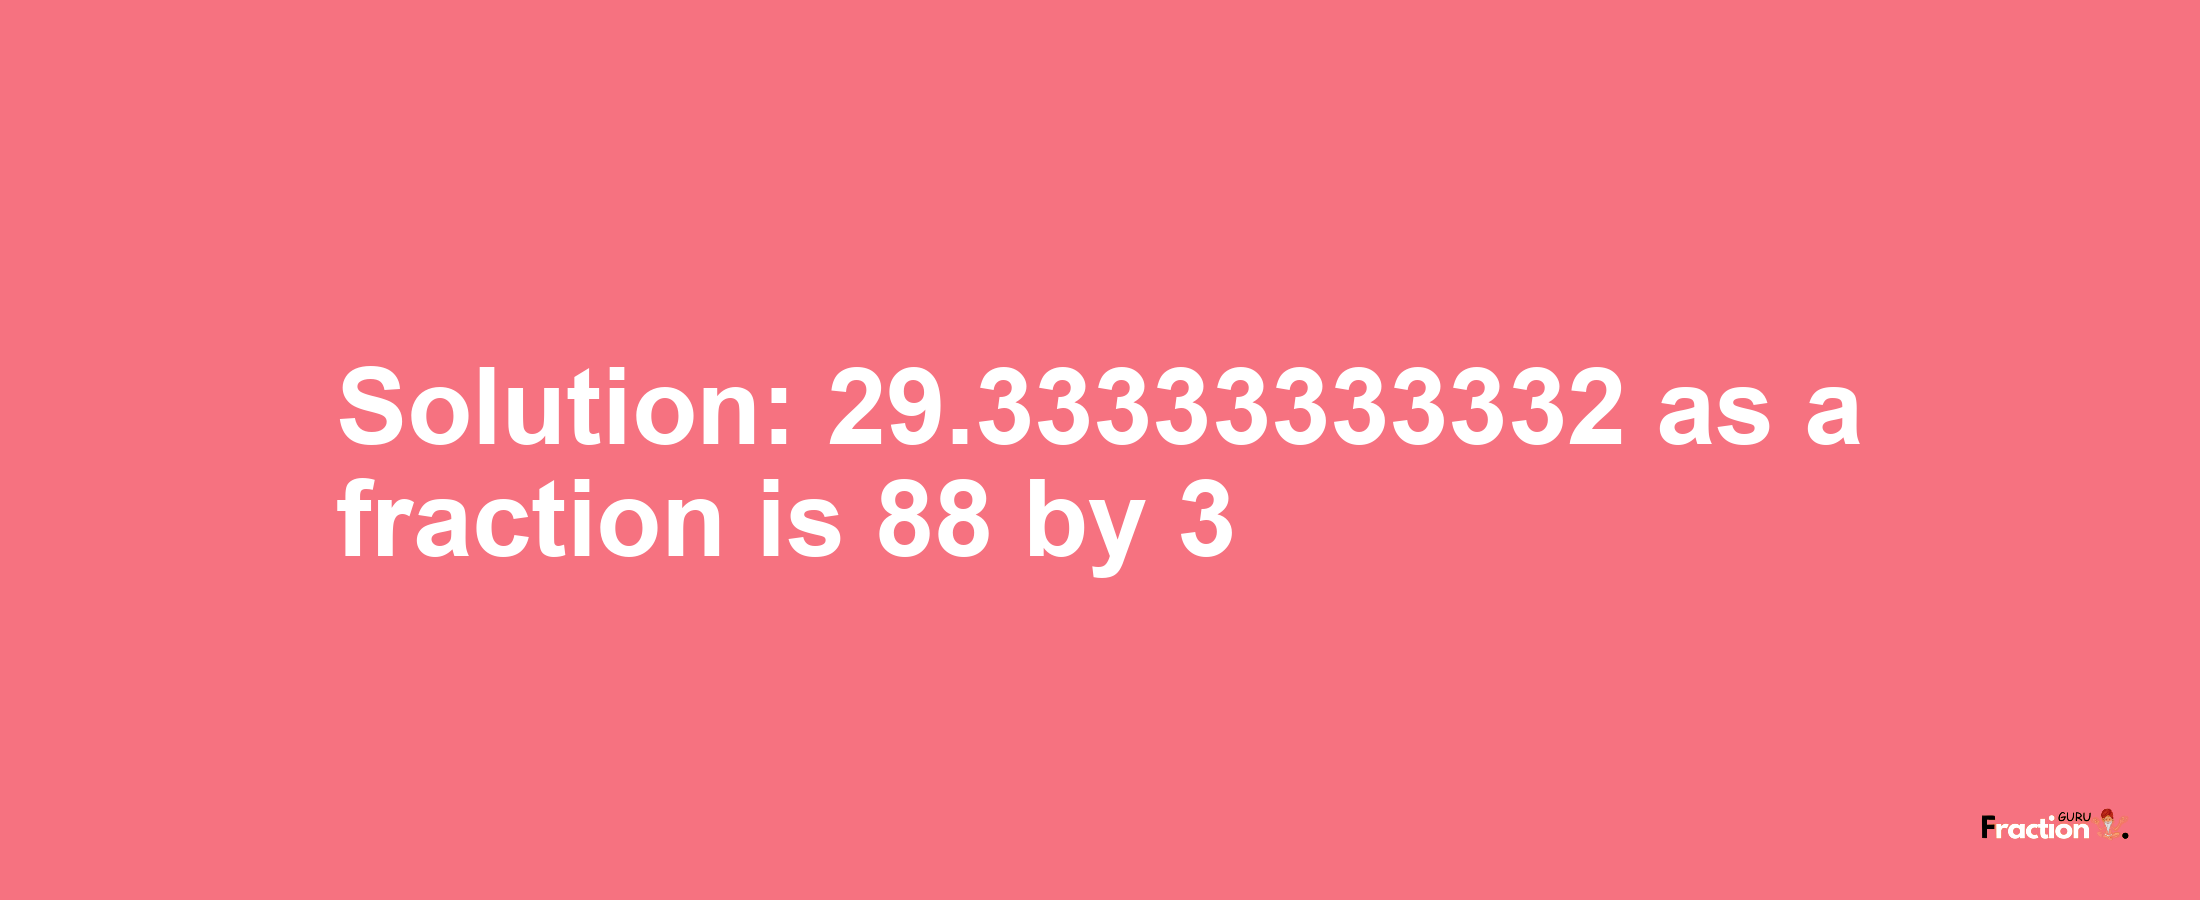 Solution:29.33333333332 as a fraction is 88/3